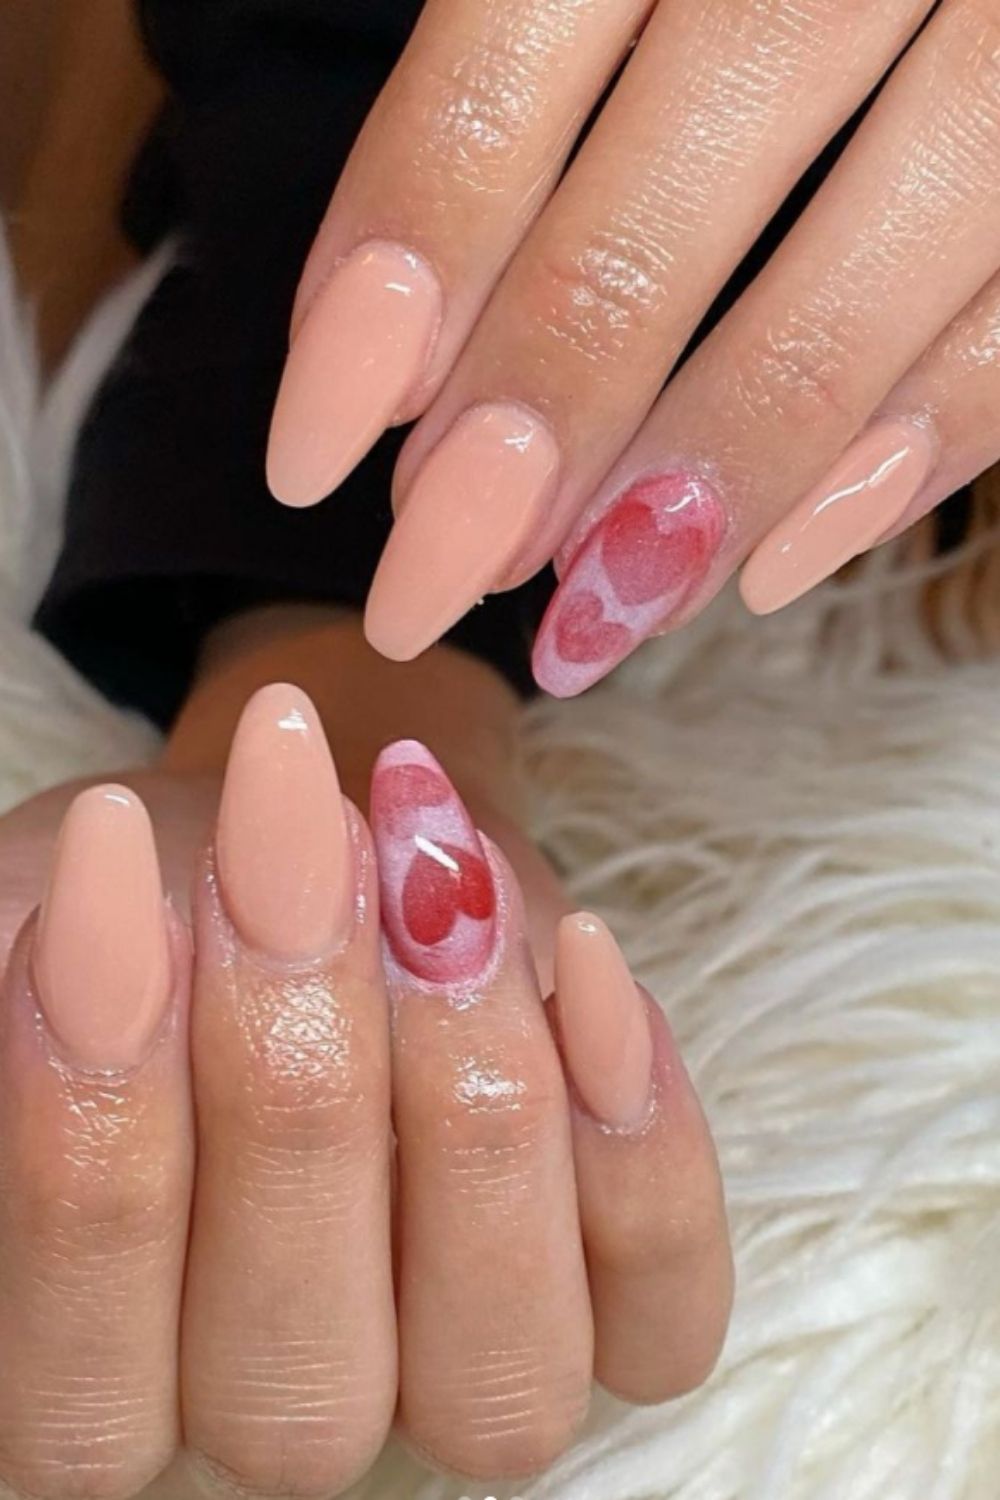 Oval nails art designs with heart